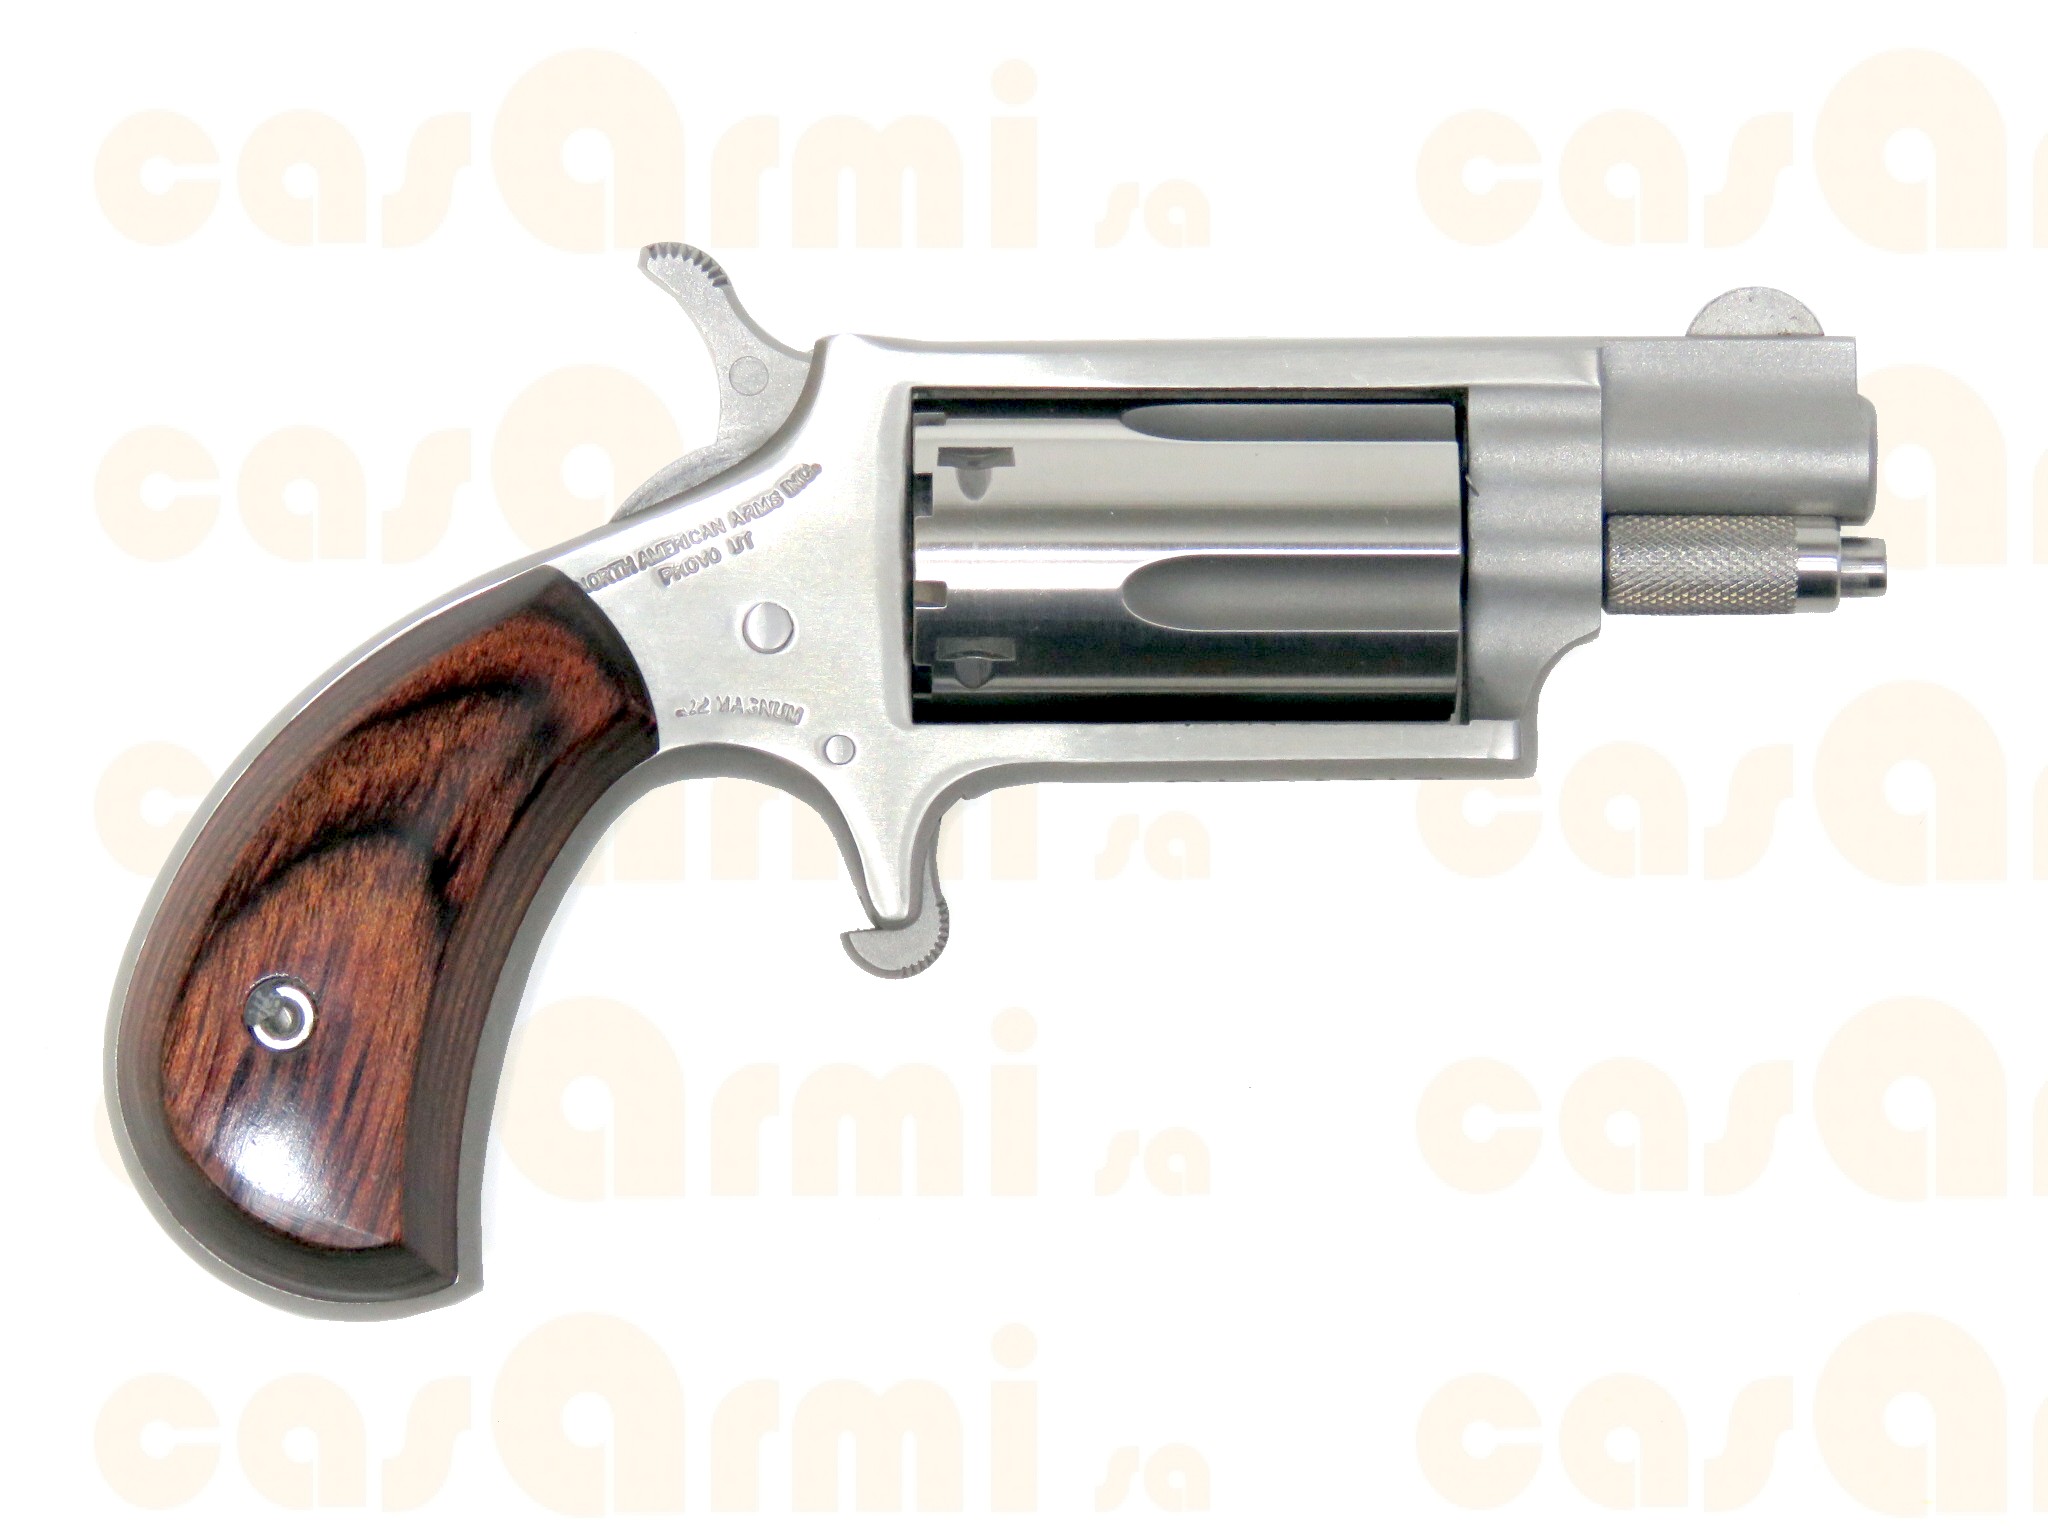 NAA stainless, canna 1 1/8', con valigetta .22 magnum